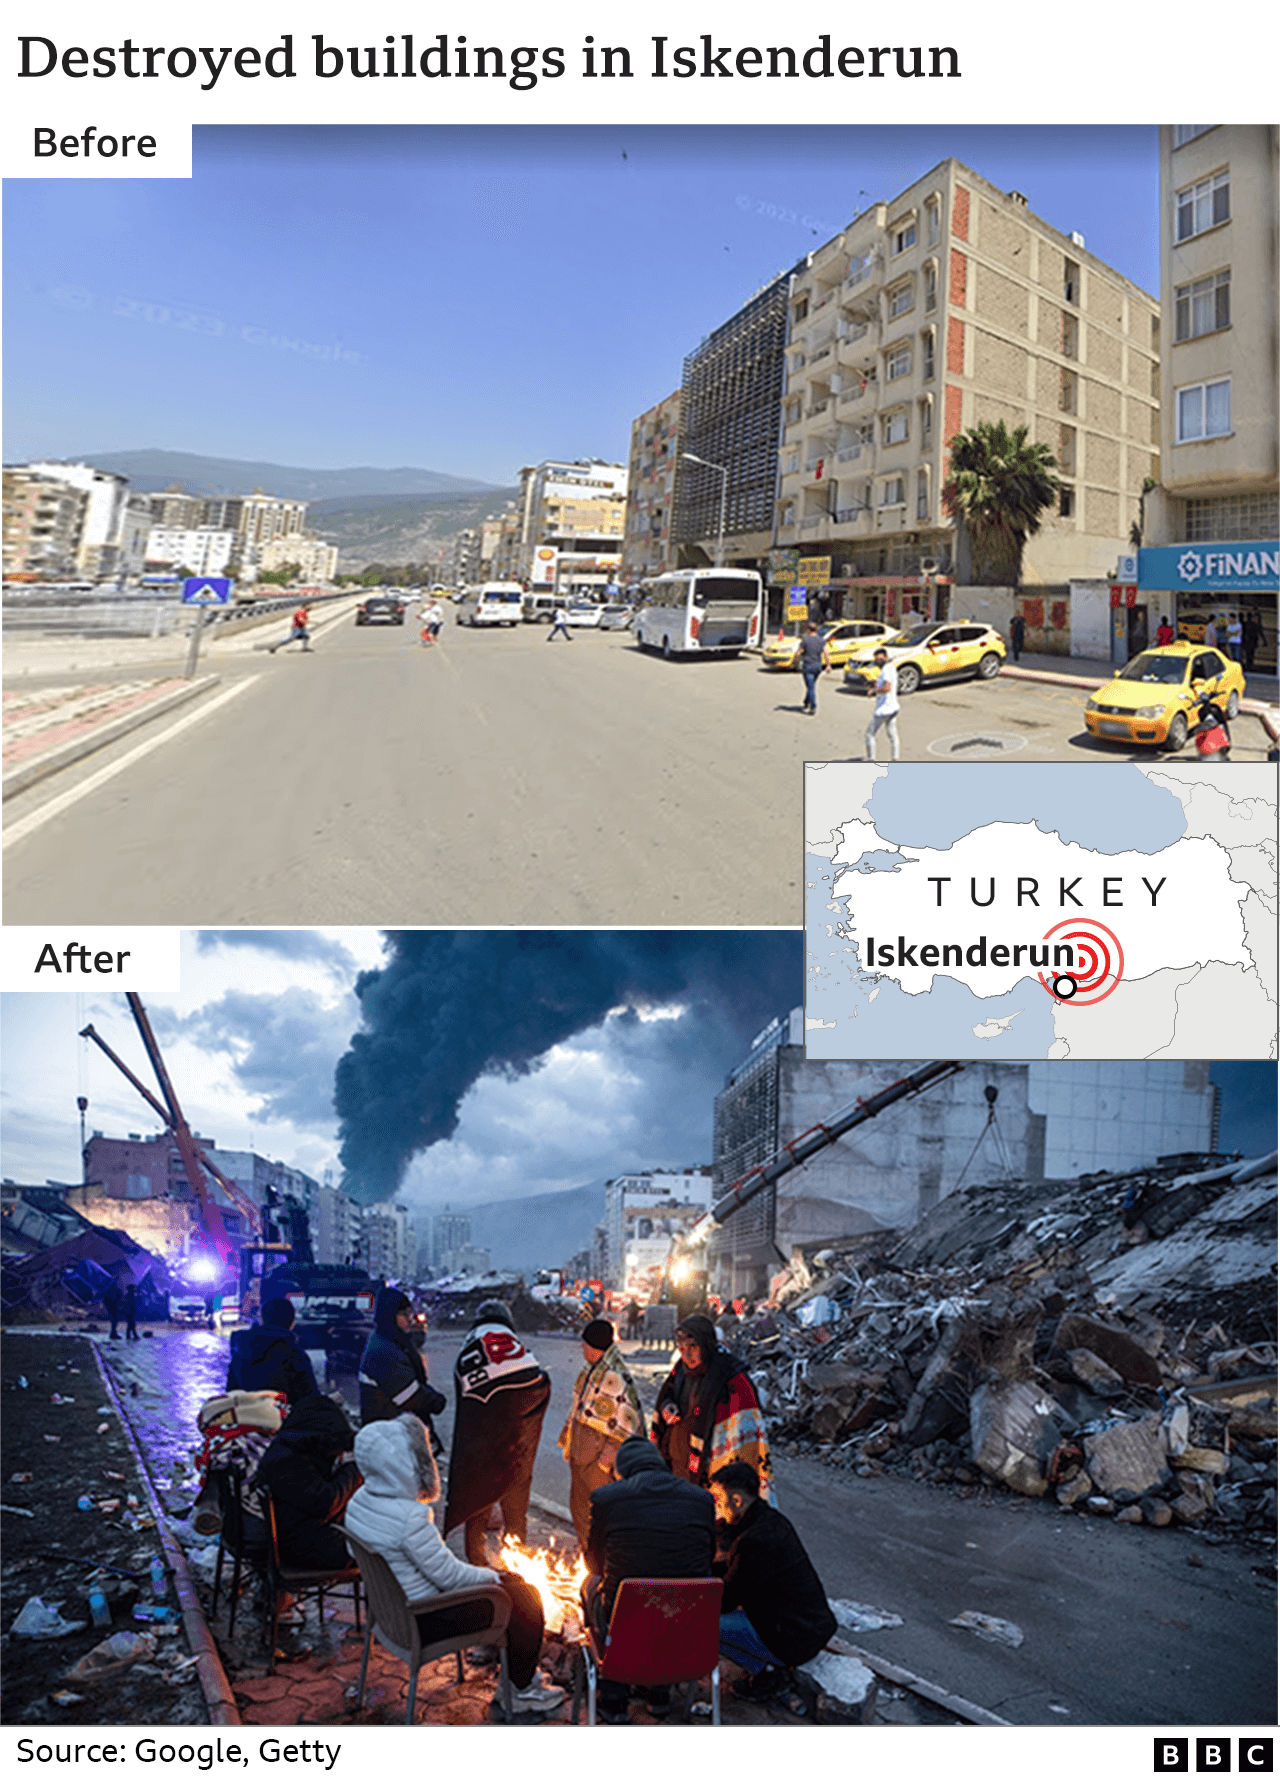 Before and after images showing collapsed buildings in Iskenderun, Turkey.